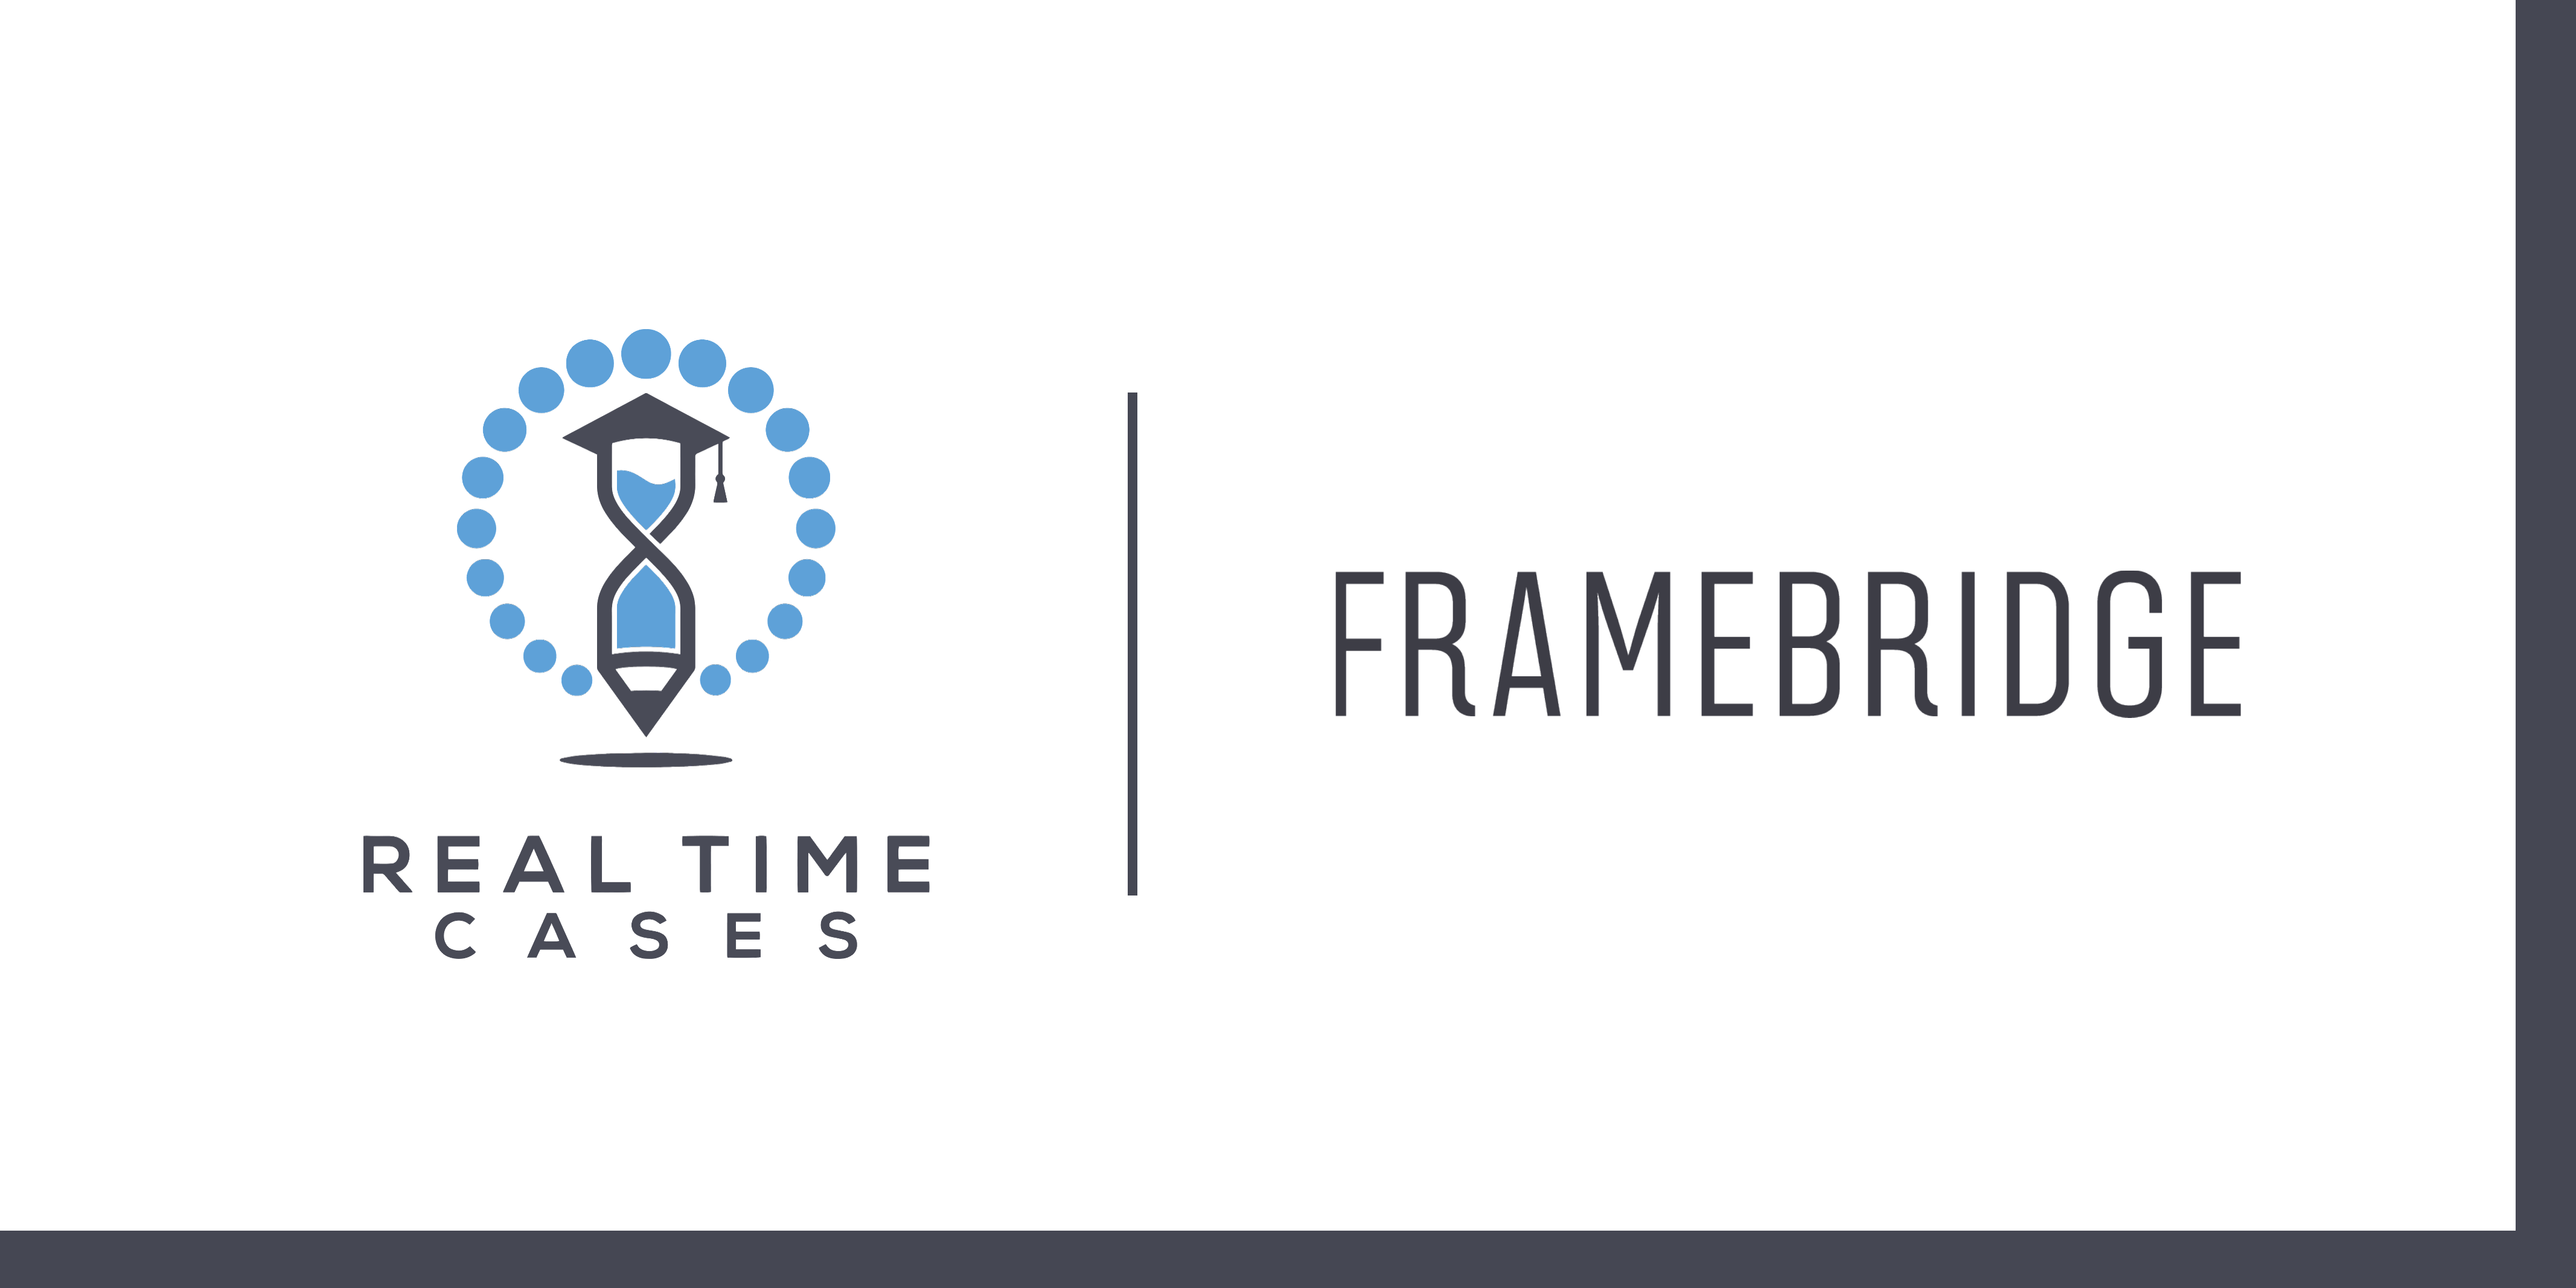 Partnership Announcement - Real Time Cases and Framebridge